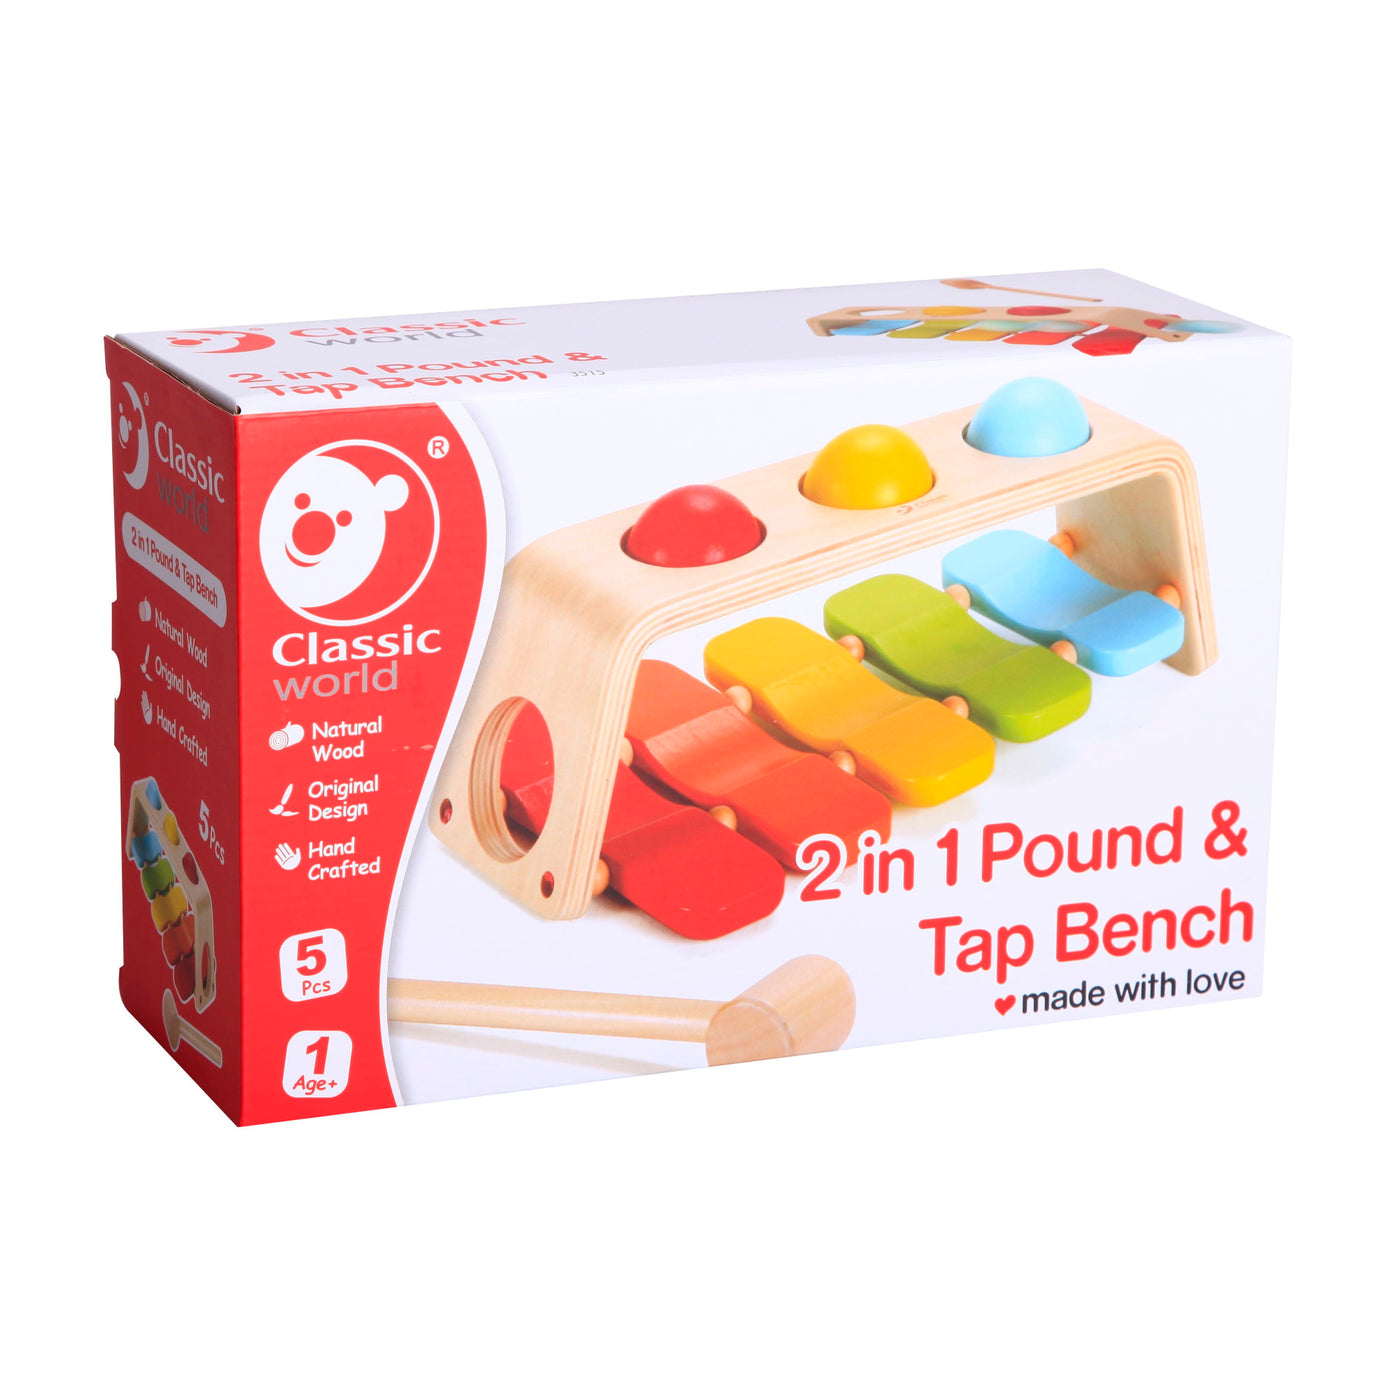 2 in 1 Pound & Tap Bench